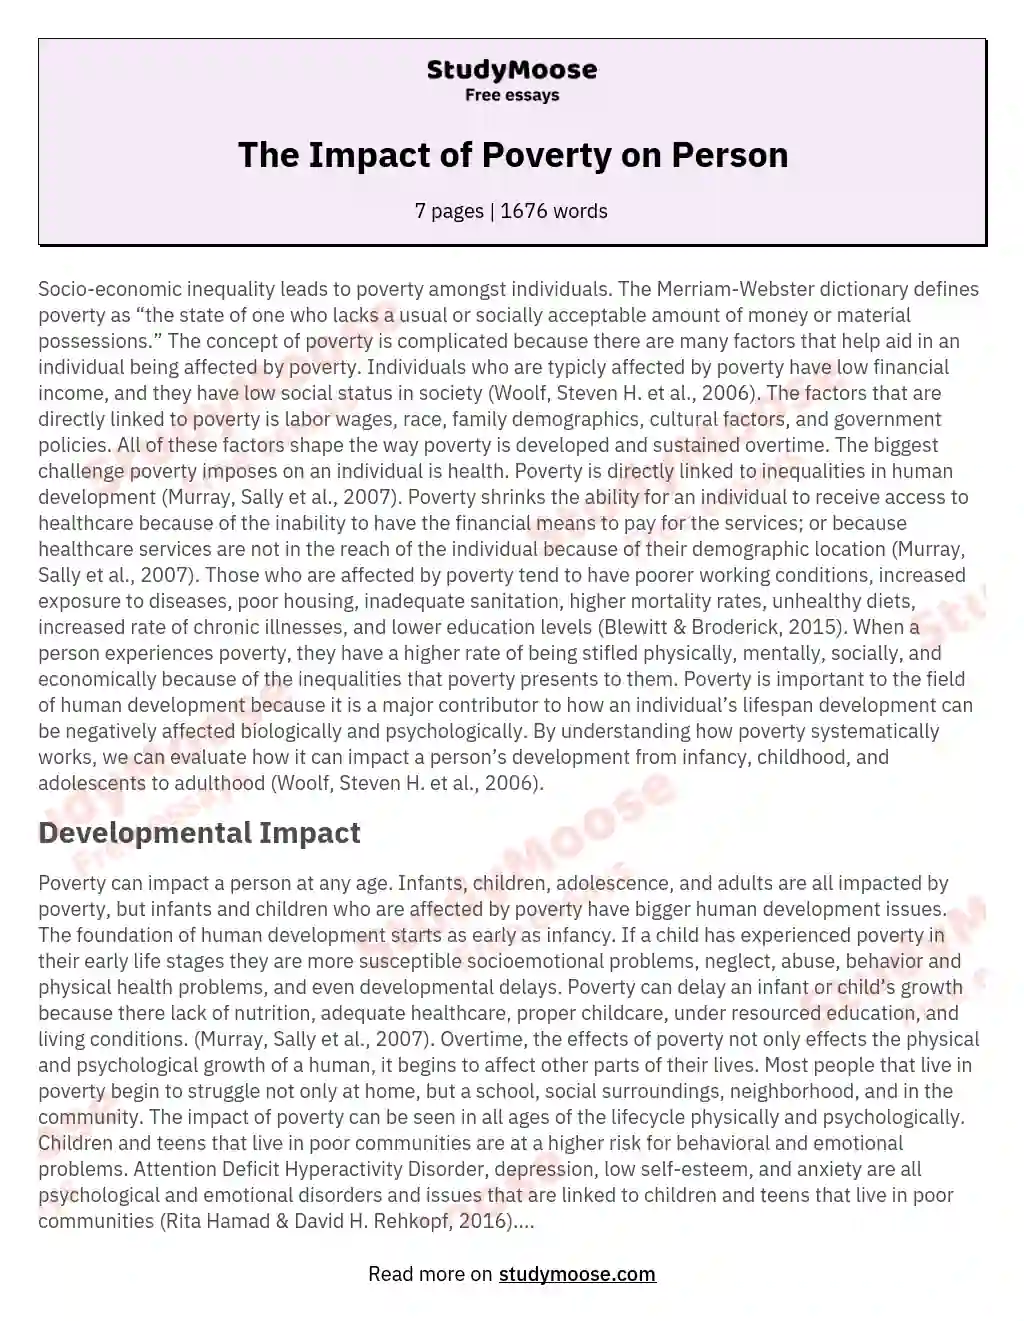 poverty essay for students